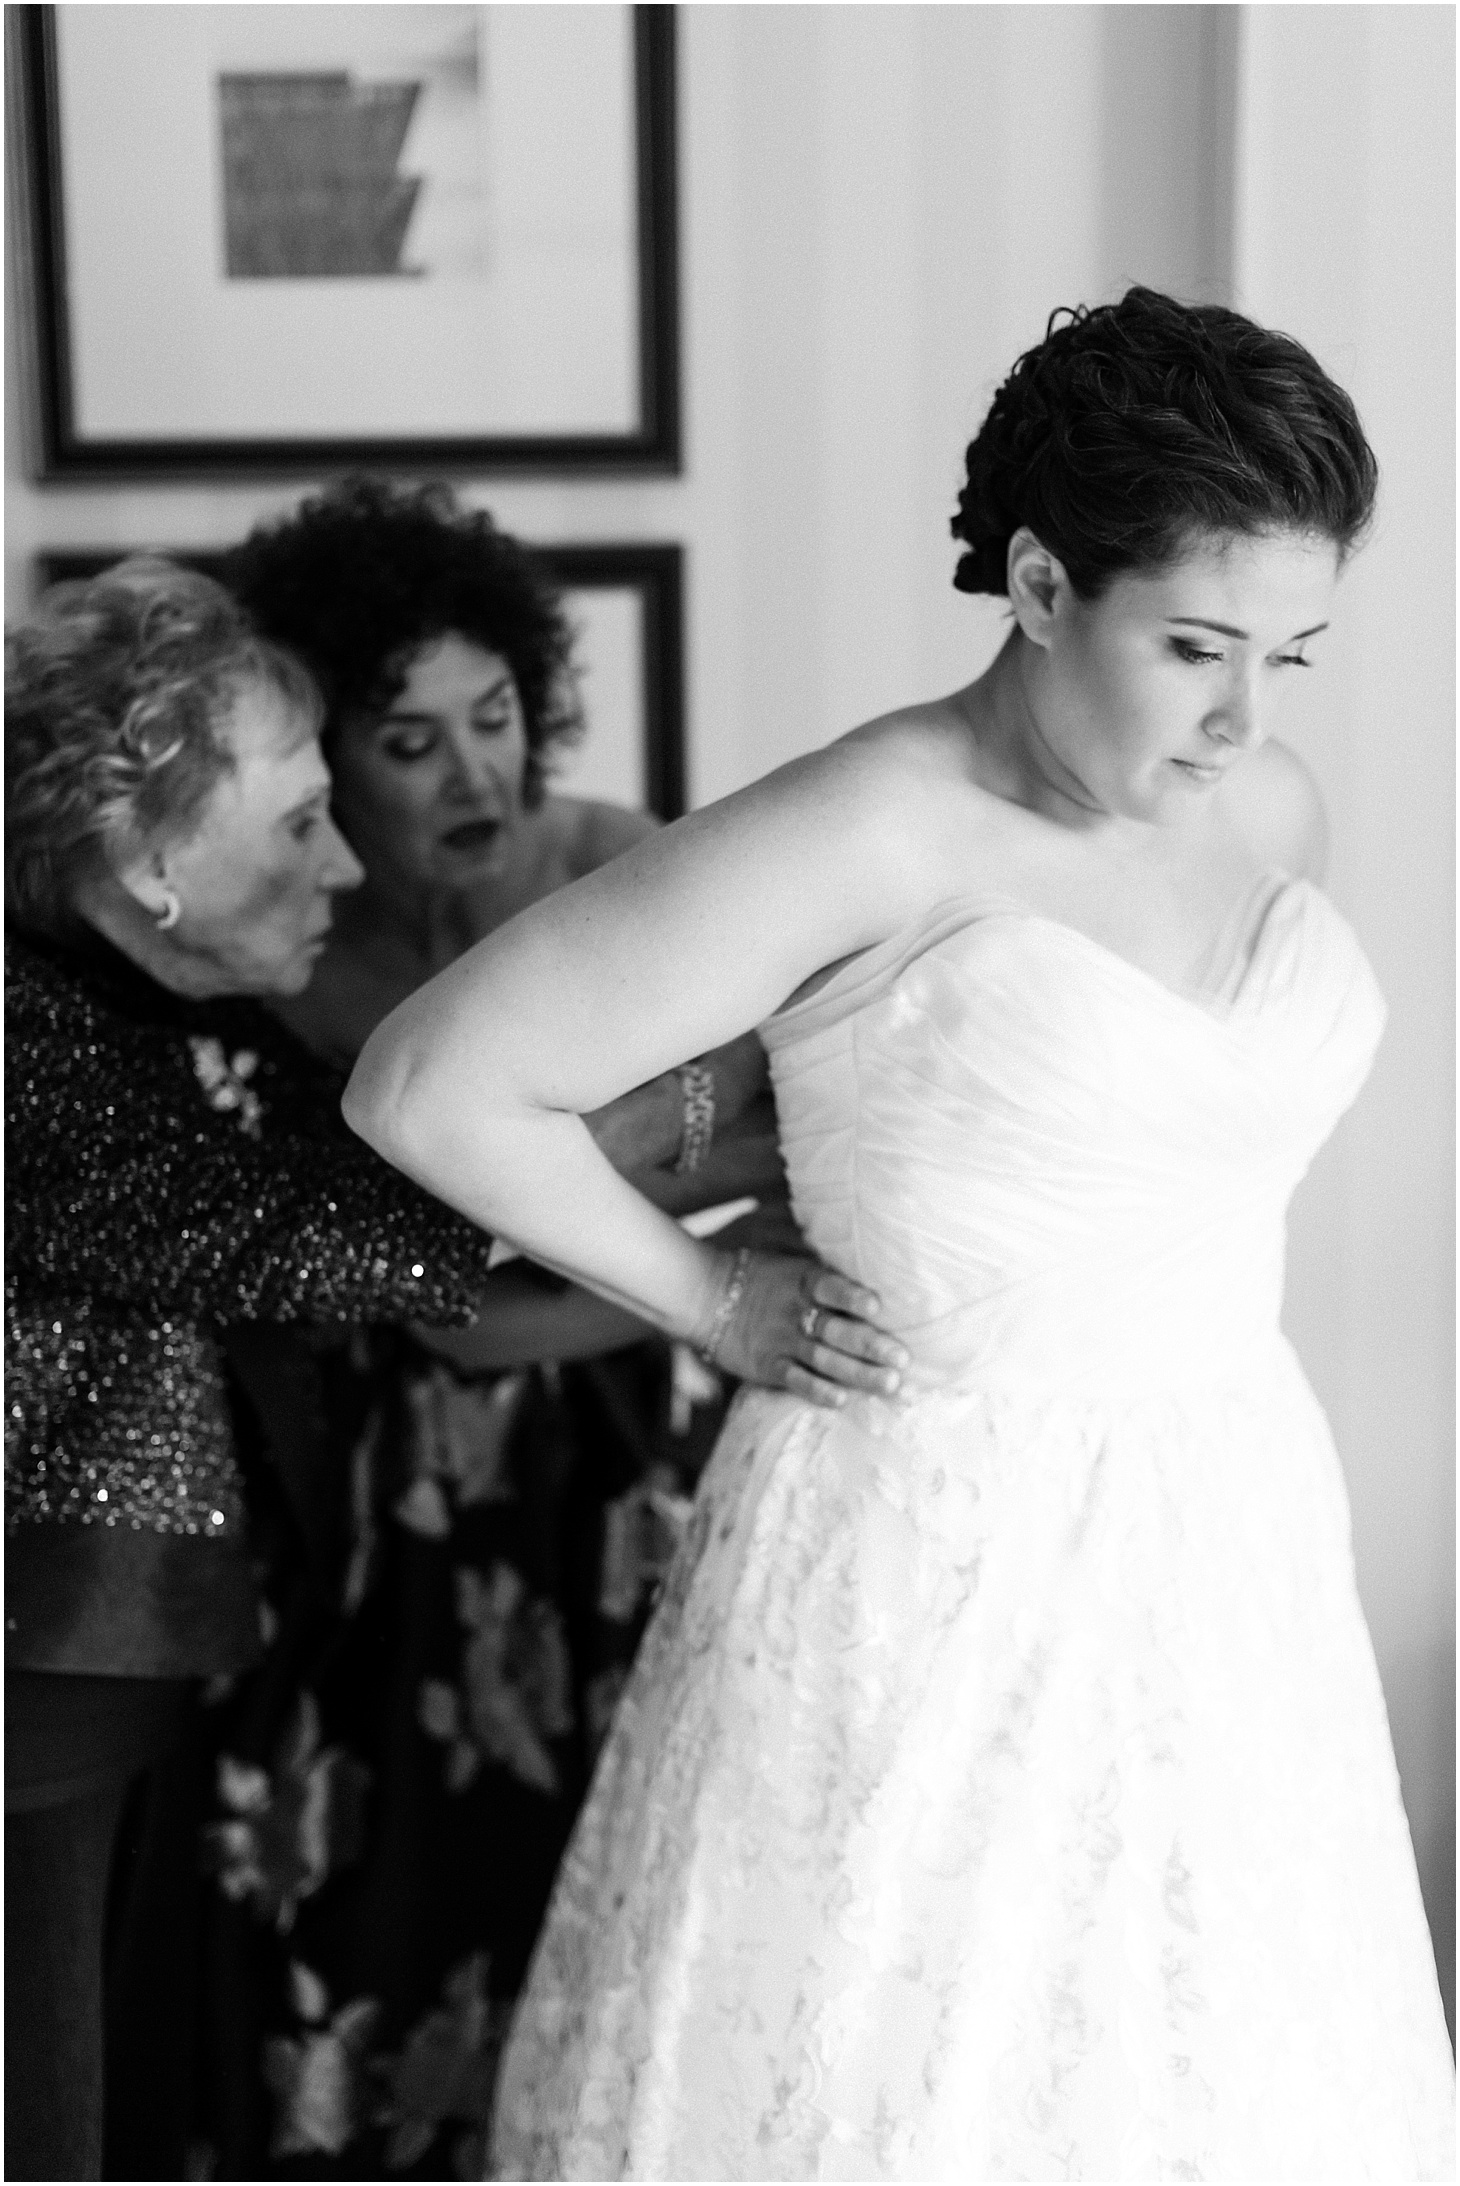 Bride Getting ready with Mother and Grandmother at the Hay-Adams Hotel | Winter Brunch Wedding at Hay-Adams Hotel in DC | Sarah Bradshaw Photography